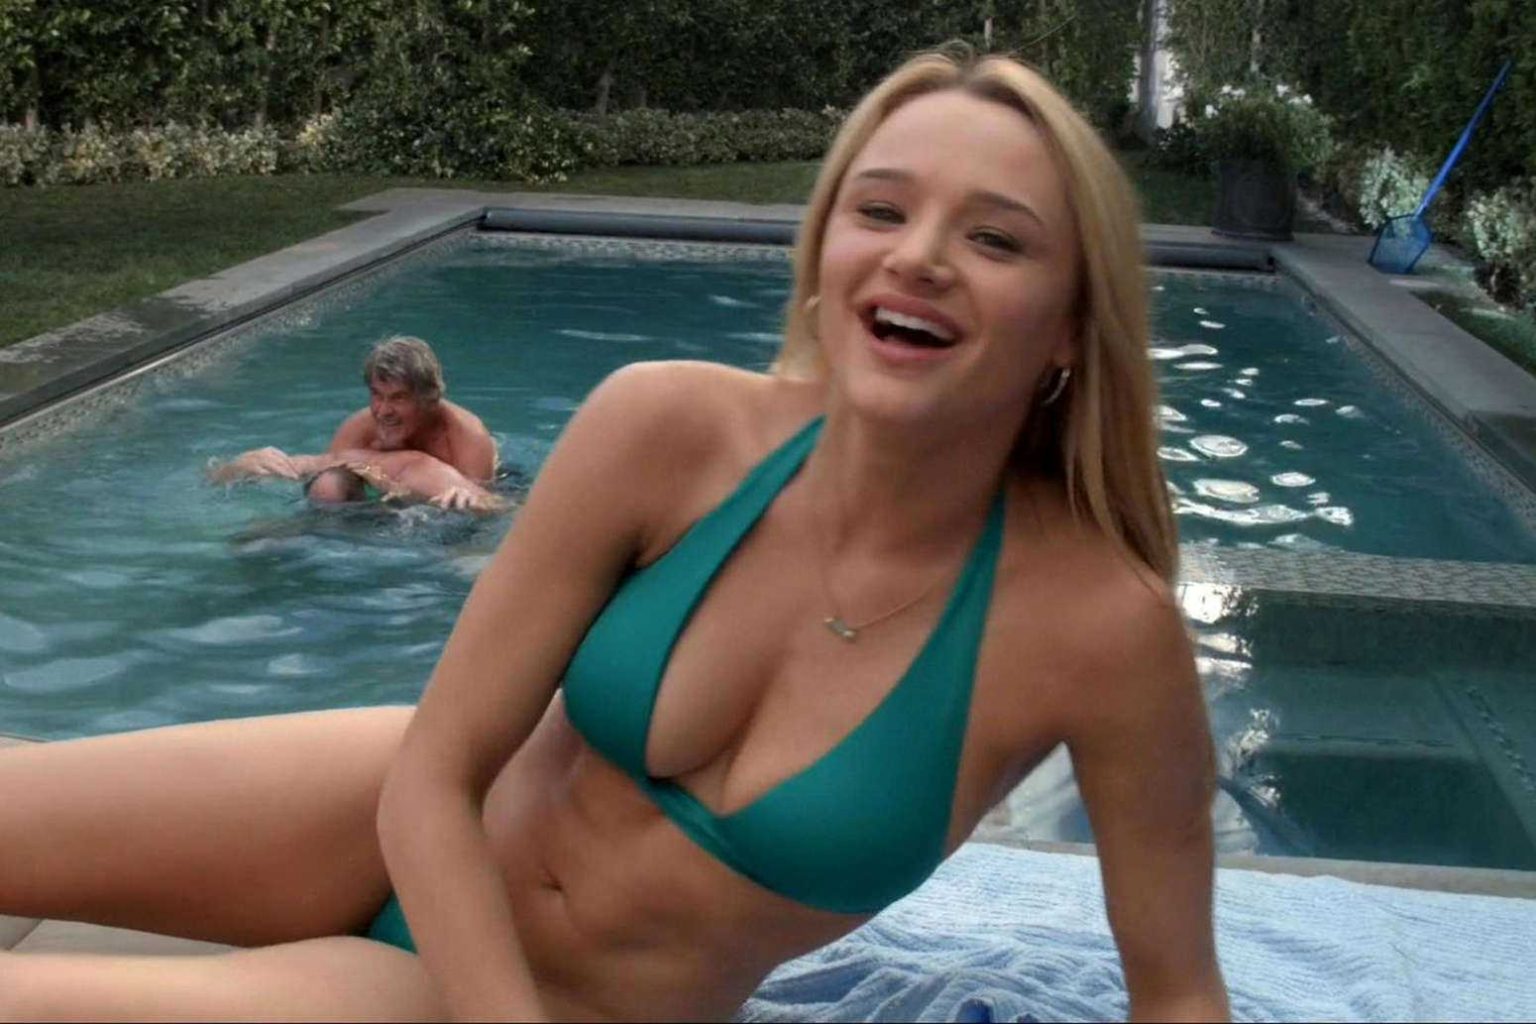 51 Hunter King Nude Pictures Display Her As A Skilled Performer 94